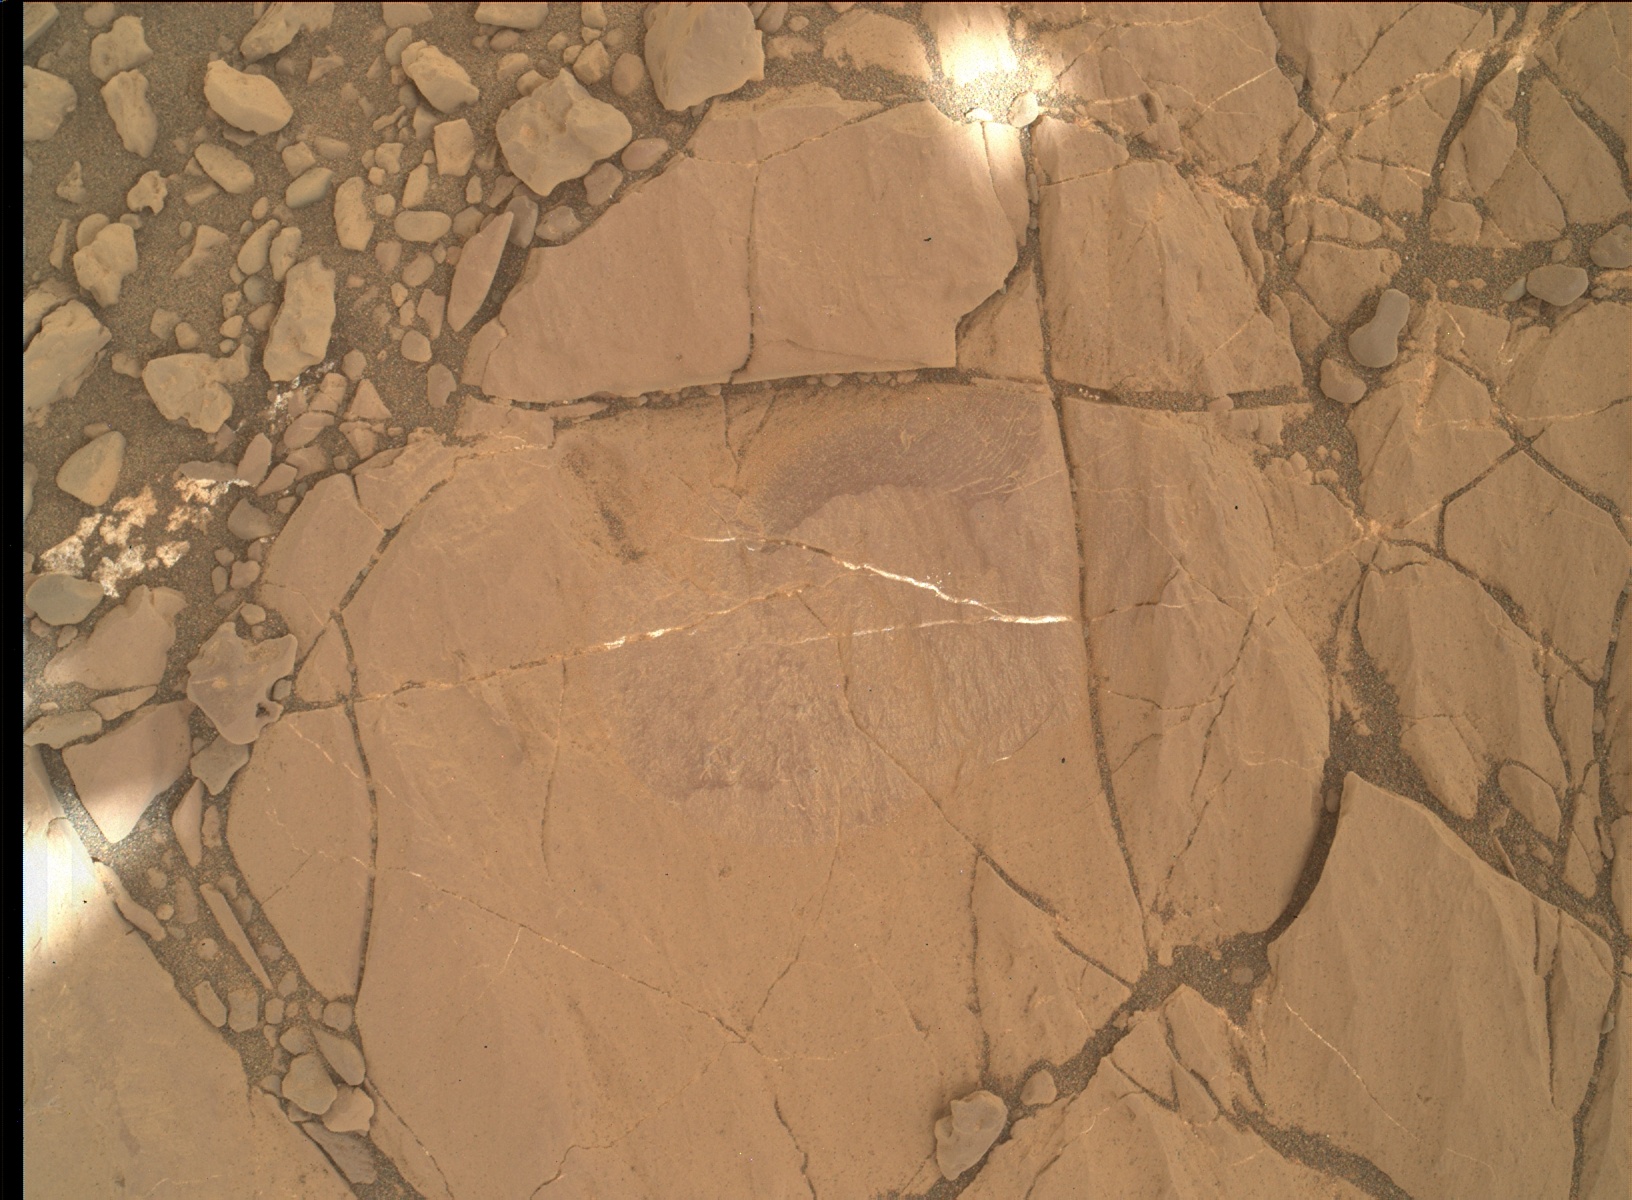 Nasa's Mars rover Curiosity acquired this image using its Mars Hand Lens Imager (MAHLI) on Sol 1875